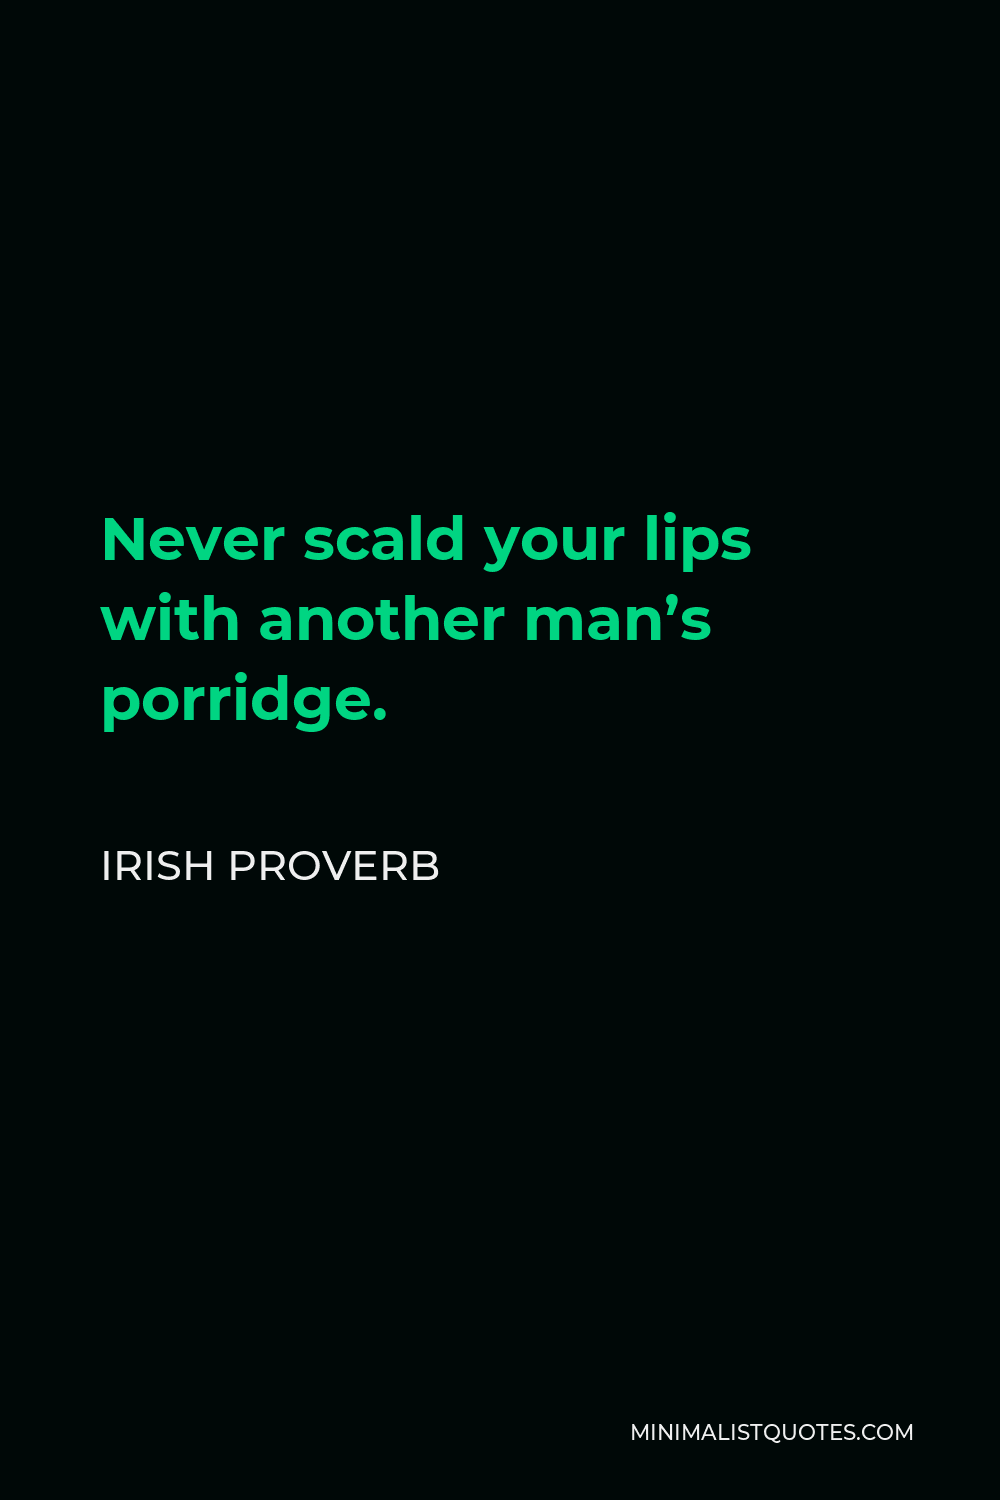 Irish Proverb Quote - Never scald your lips with another man’s porridge.